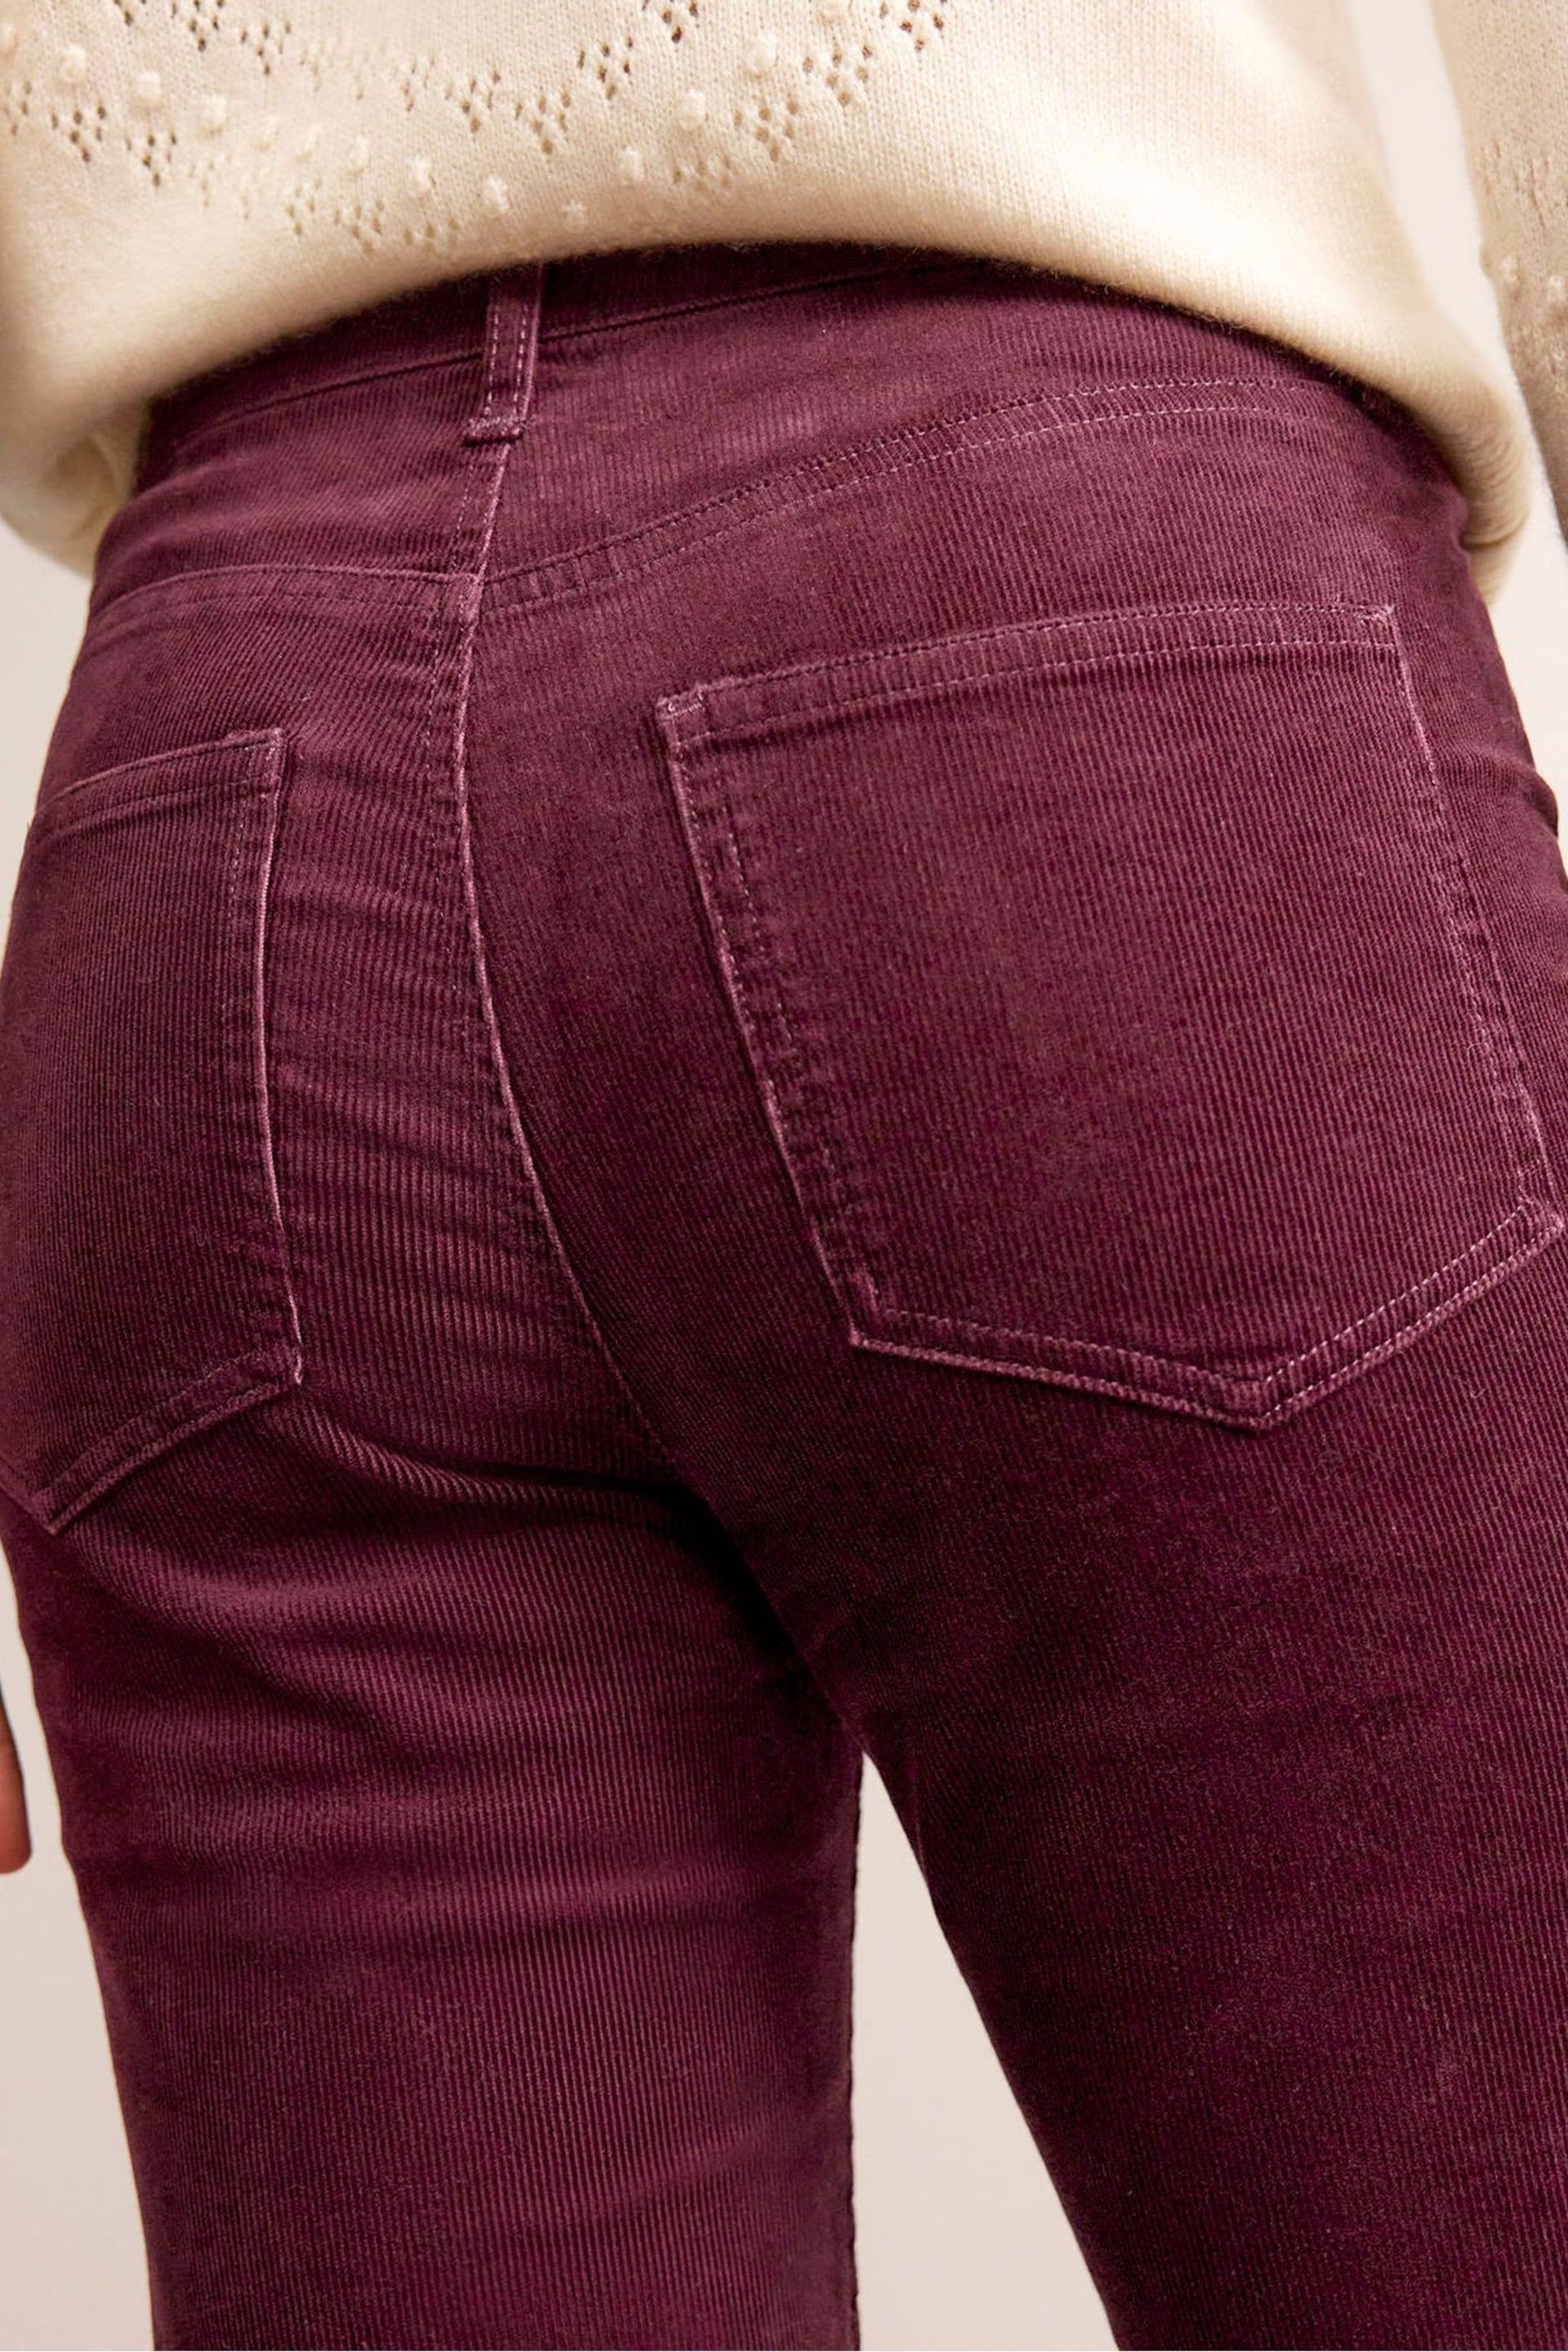 Boden Red Slim Corduroy Straight Jeans - Image 6 of 7